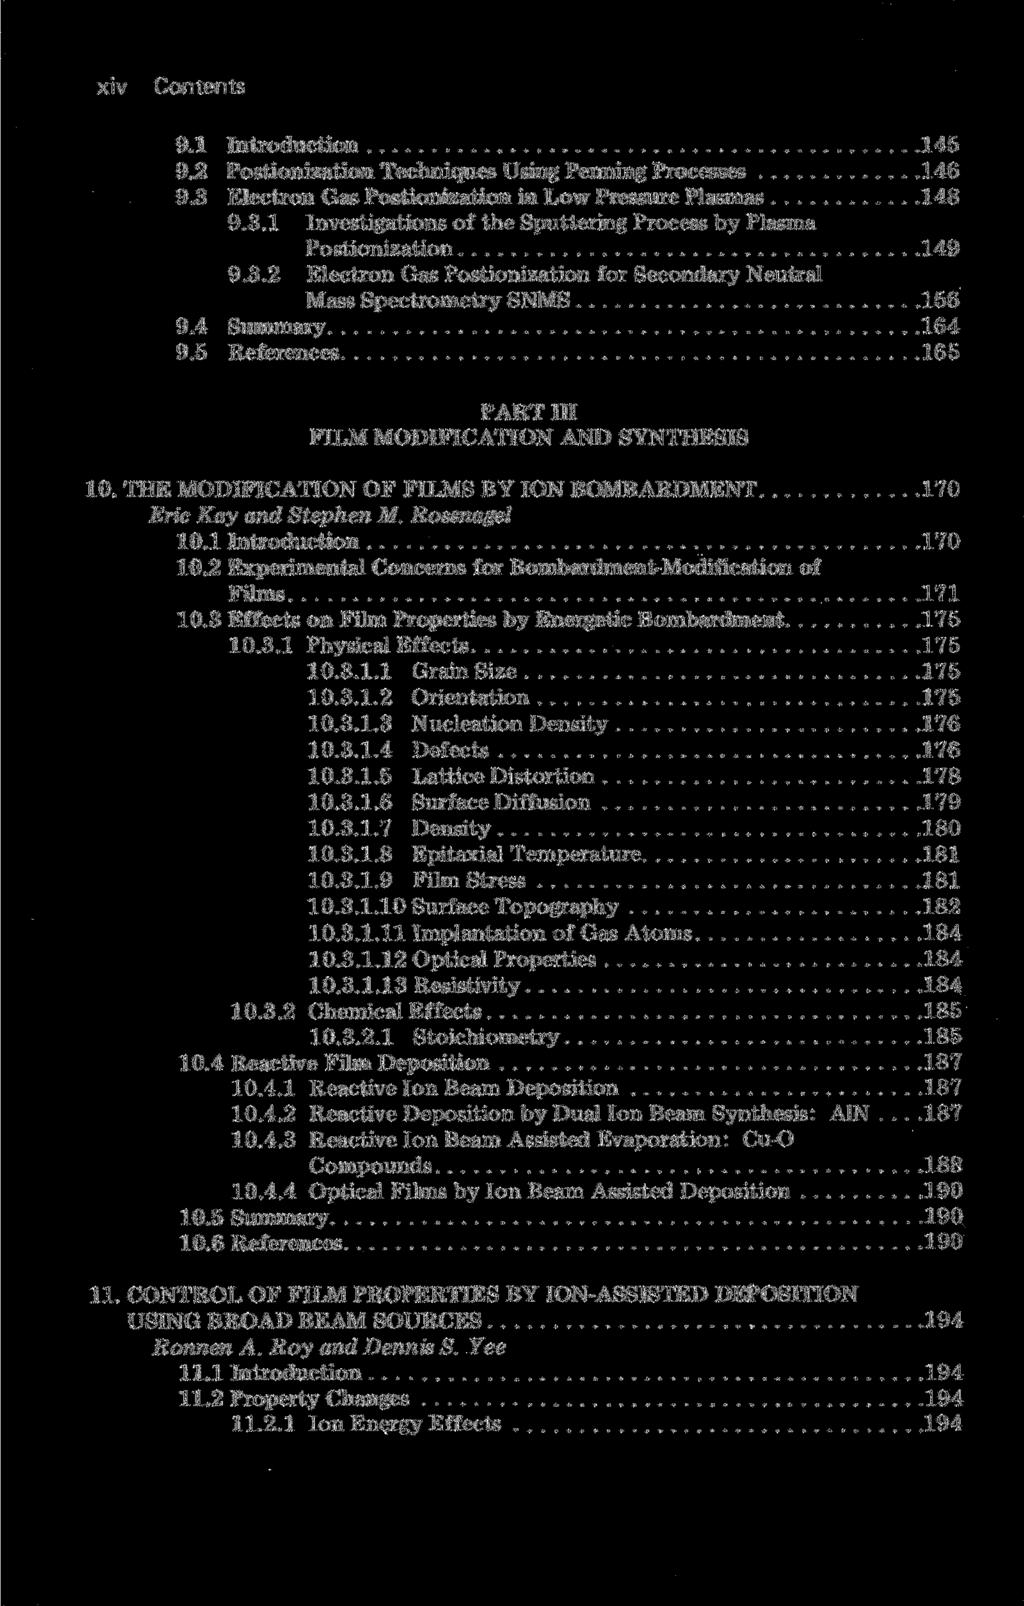 xiv Contents 9.1 Introduction 145 9.2 Postionization Techniques Using Penning Processes 146 9.3 Electron Gas Postionization in Low Pressure Plasmas 148 9.3.1 Investigations of the Sputtering Process by Plasma Postionization 149 9.